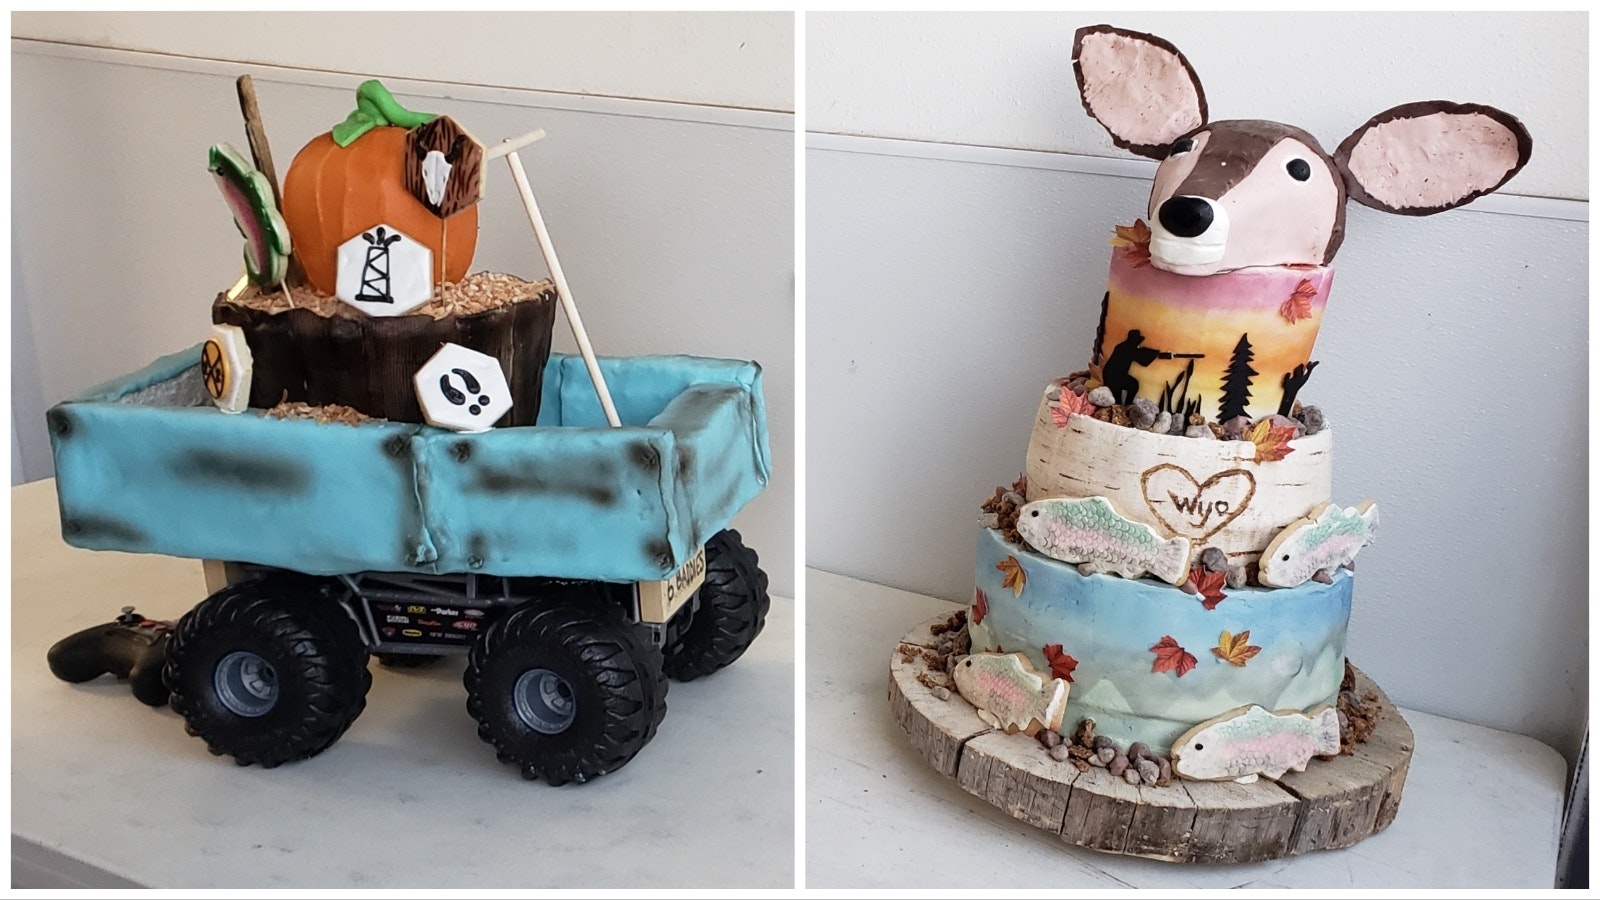 At left, a remote-controlled car carries the basket spice cake and pumpkin-shaped chocolate Guinness cake made by the Baddie Bakers. At right is 